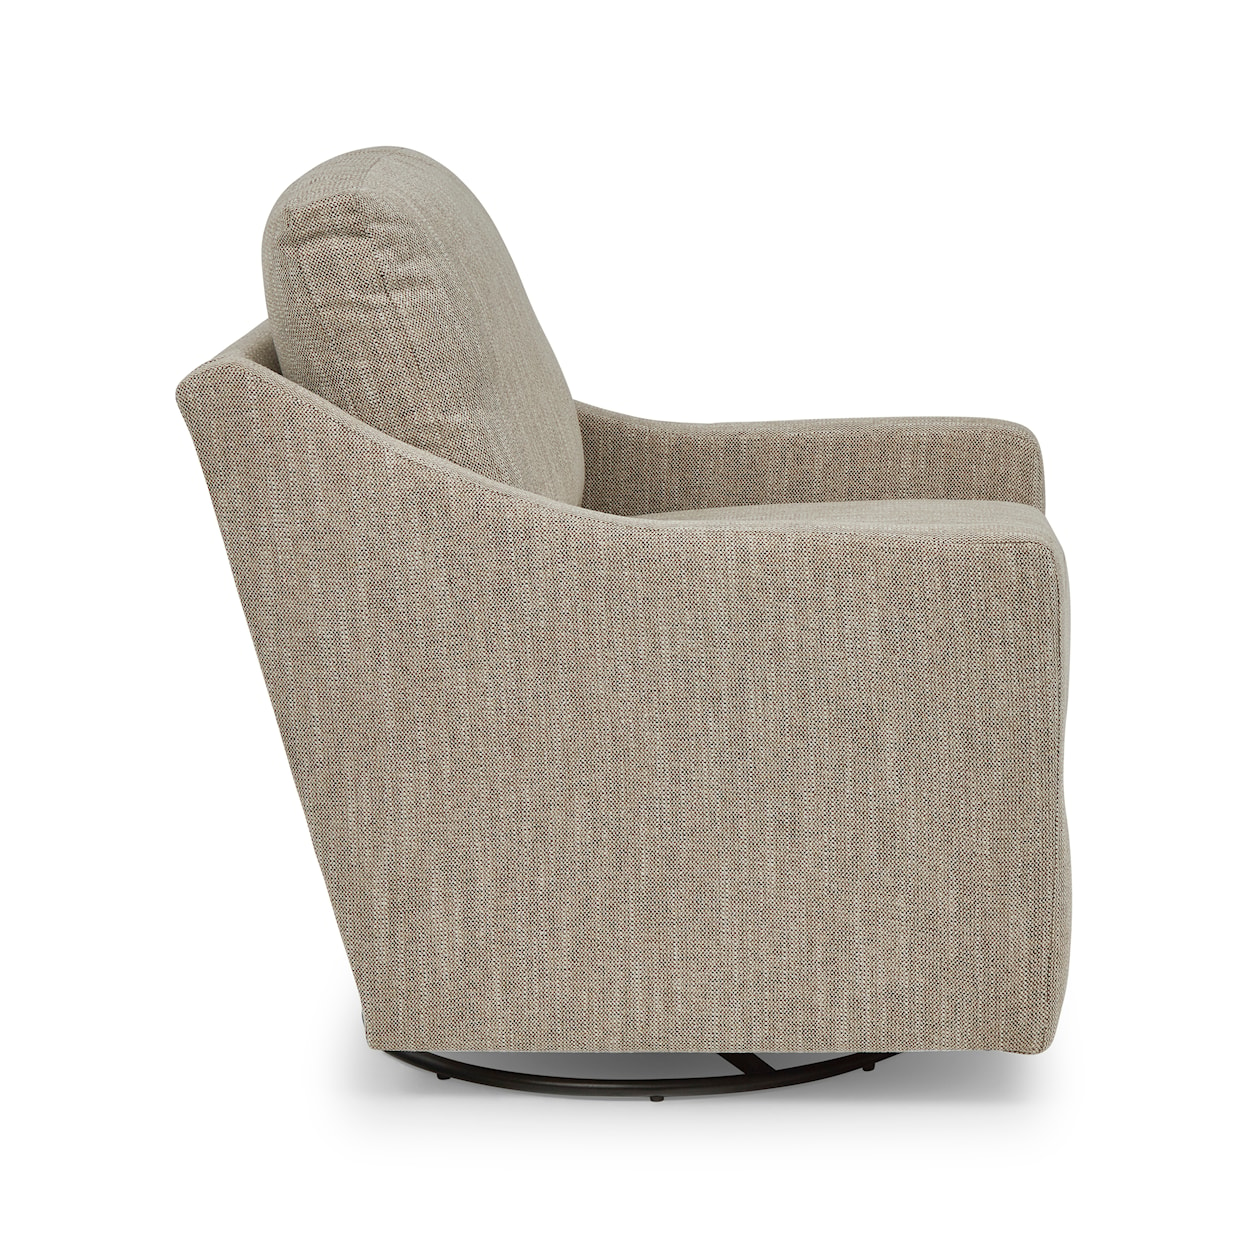 Best Home Furnishings Hallond Swivel Glider Chair